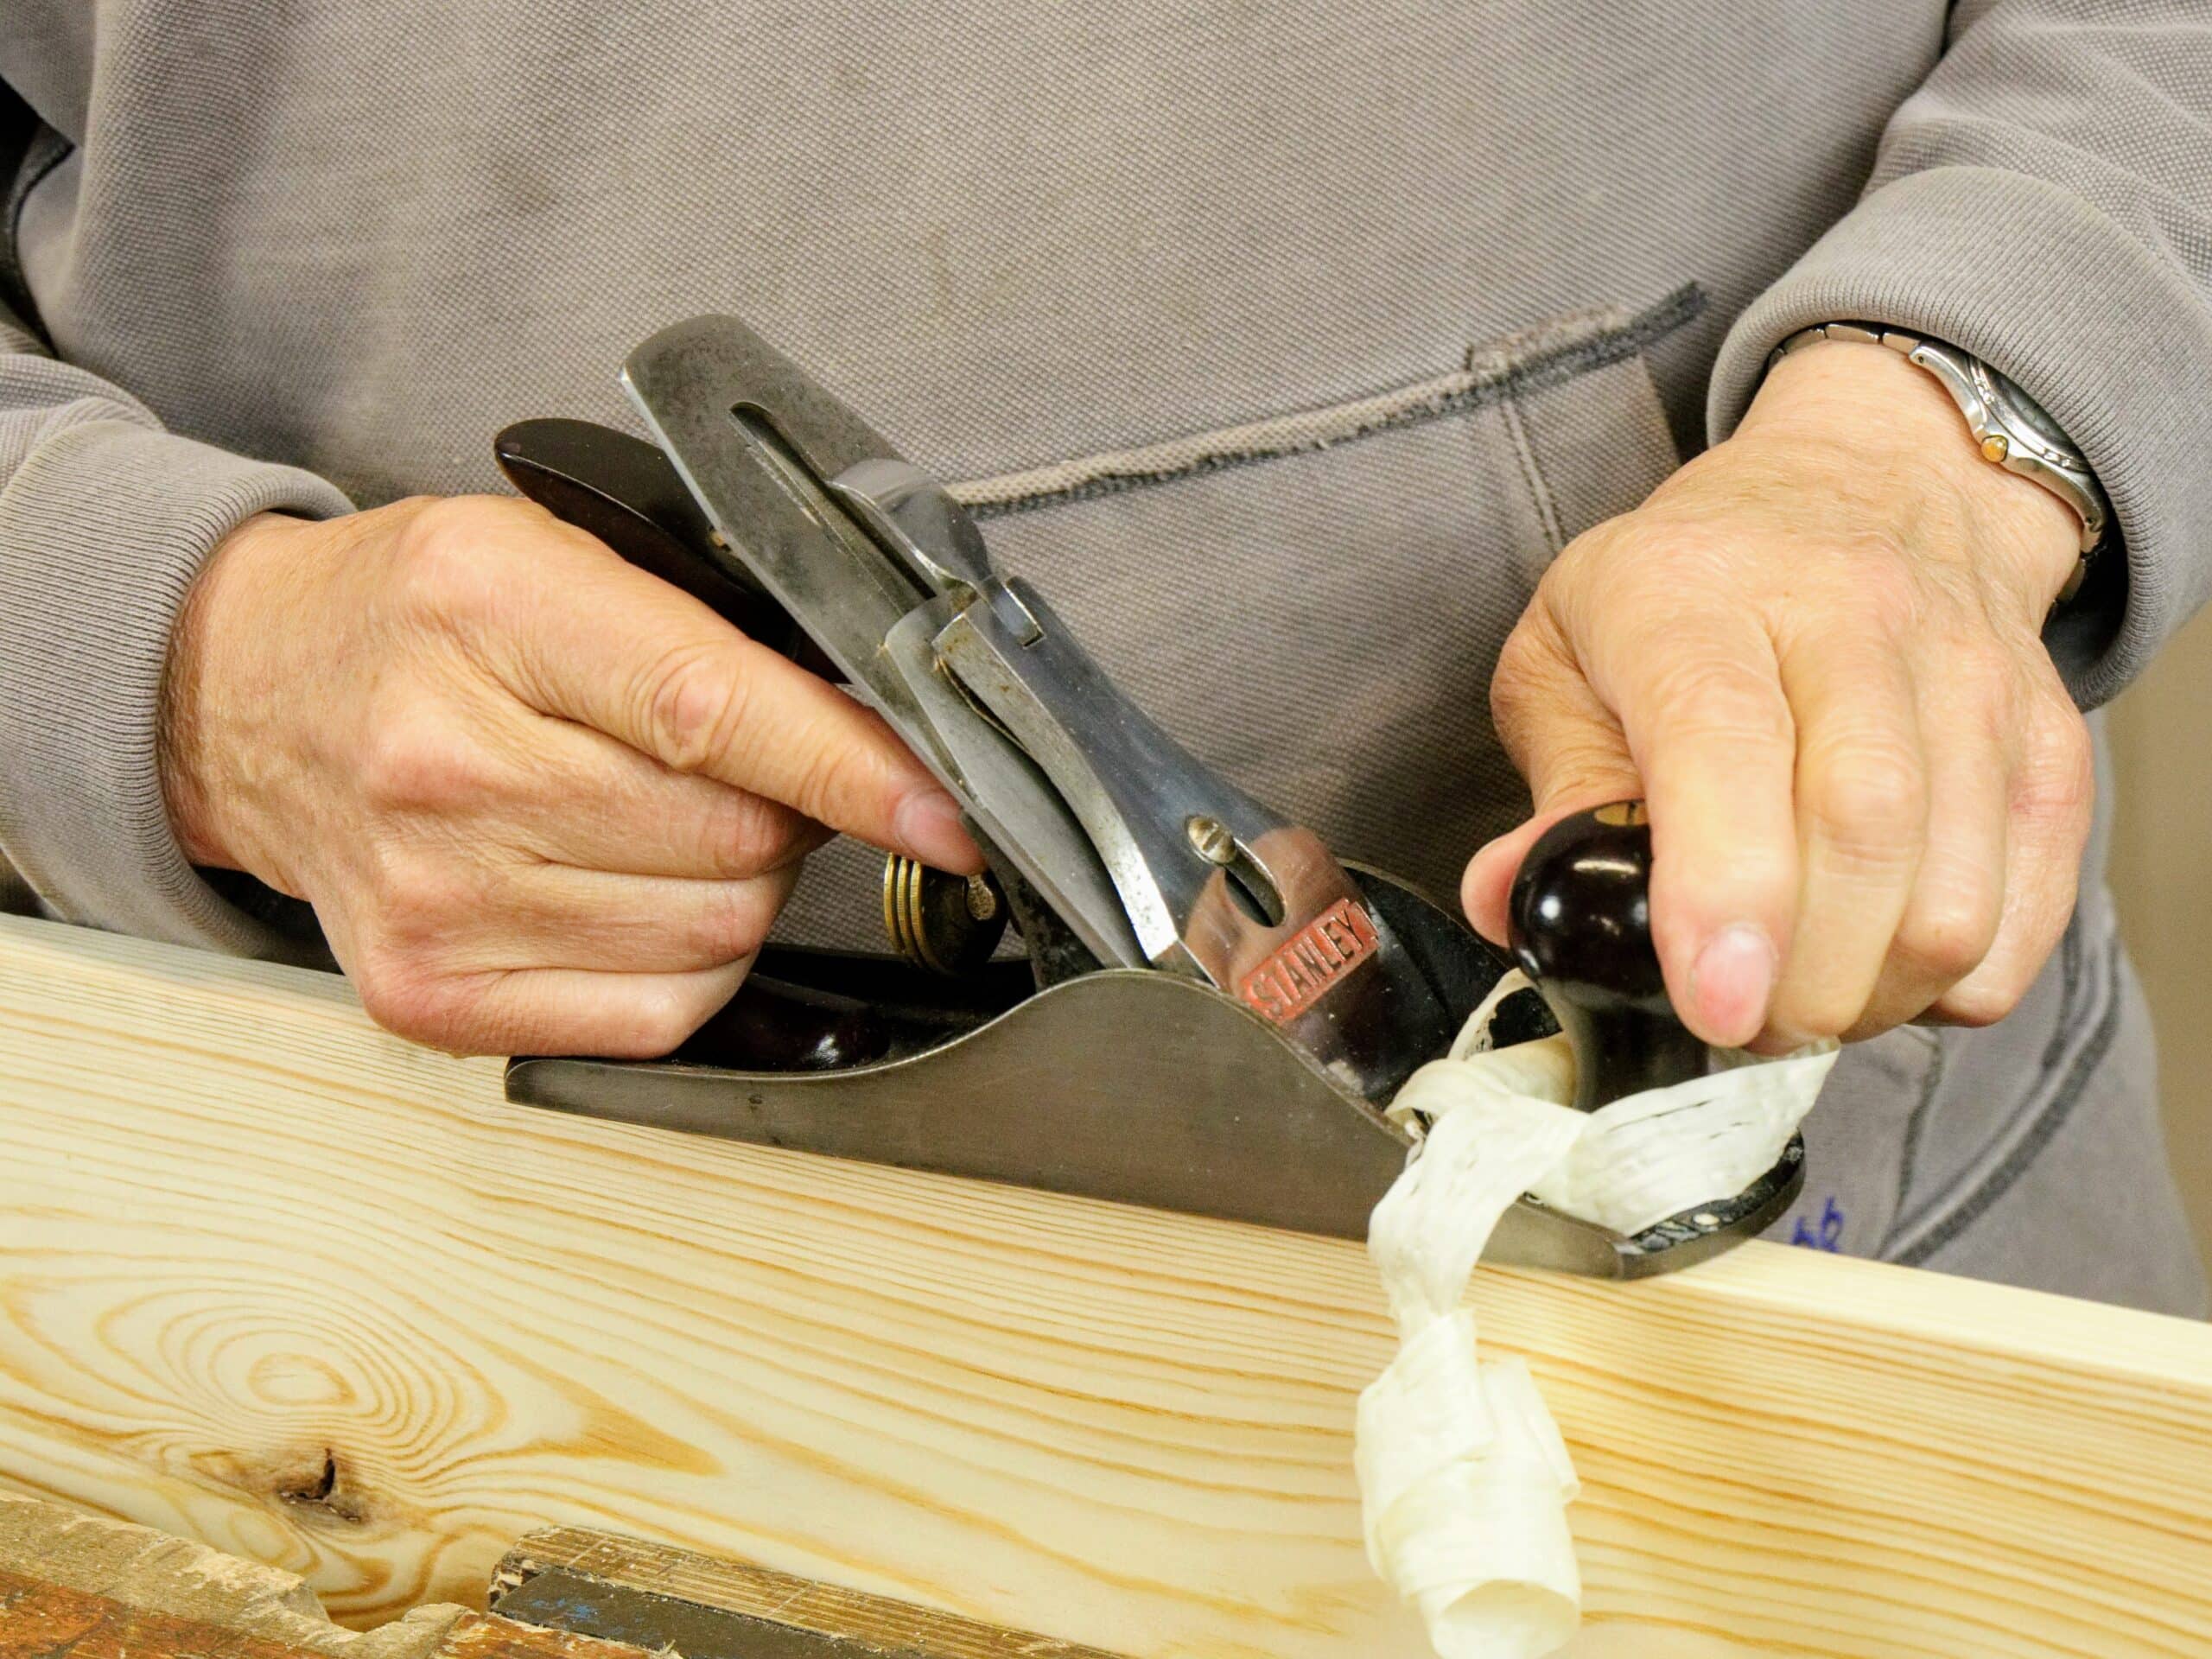 More Spokeshave Reality - Paul Sellers' Blog, Spokeshave 